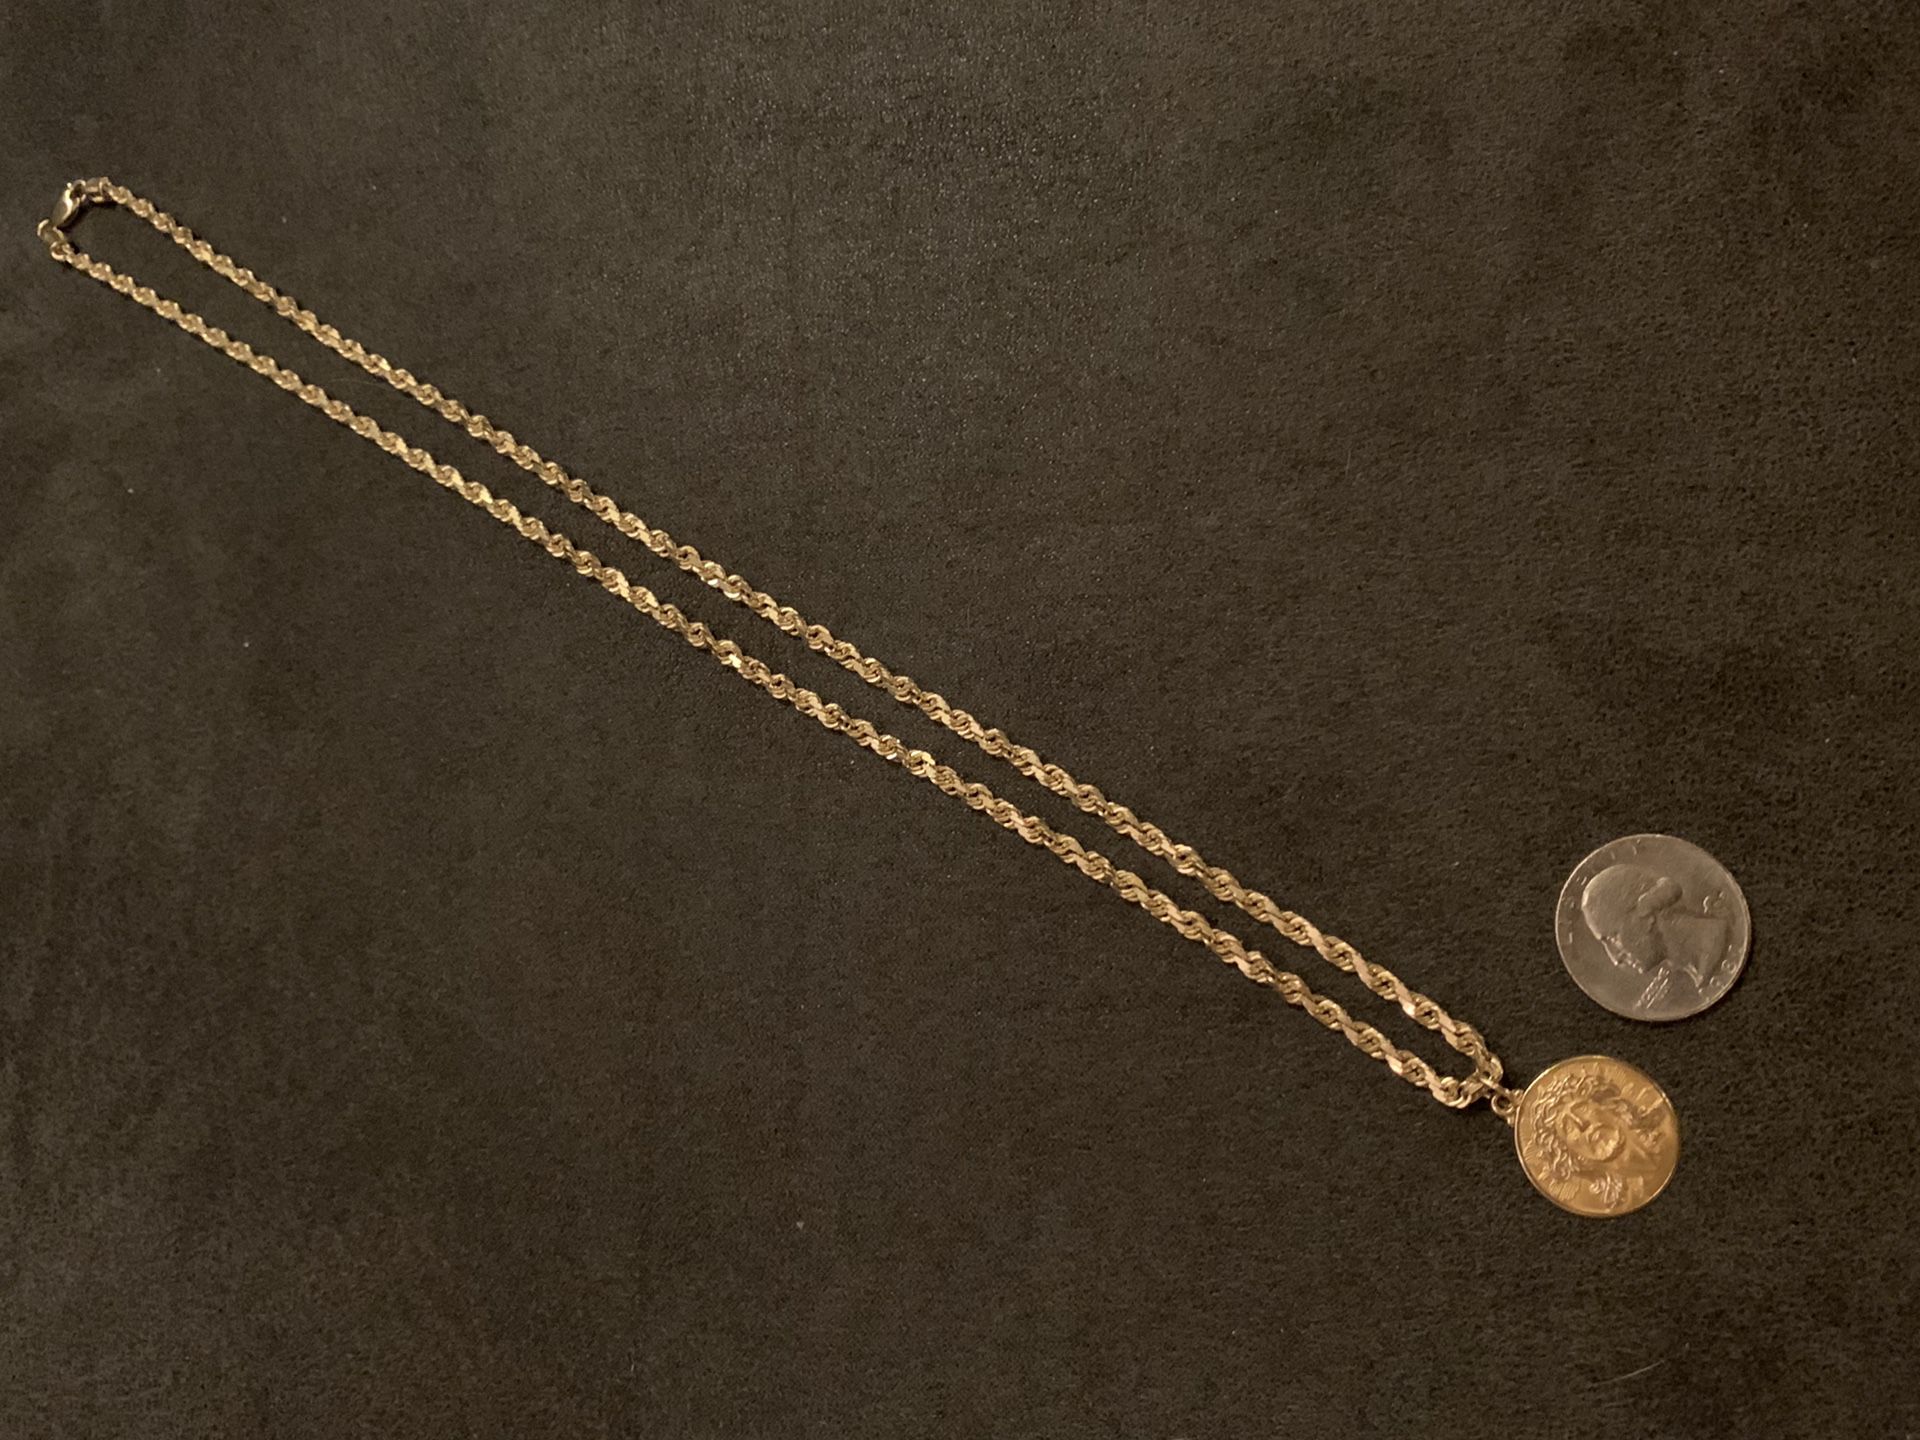 24inch 14k Yellow gold rope chain and 14k pendant